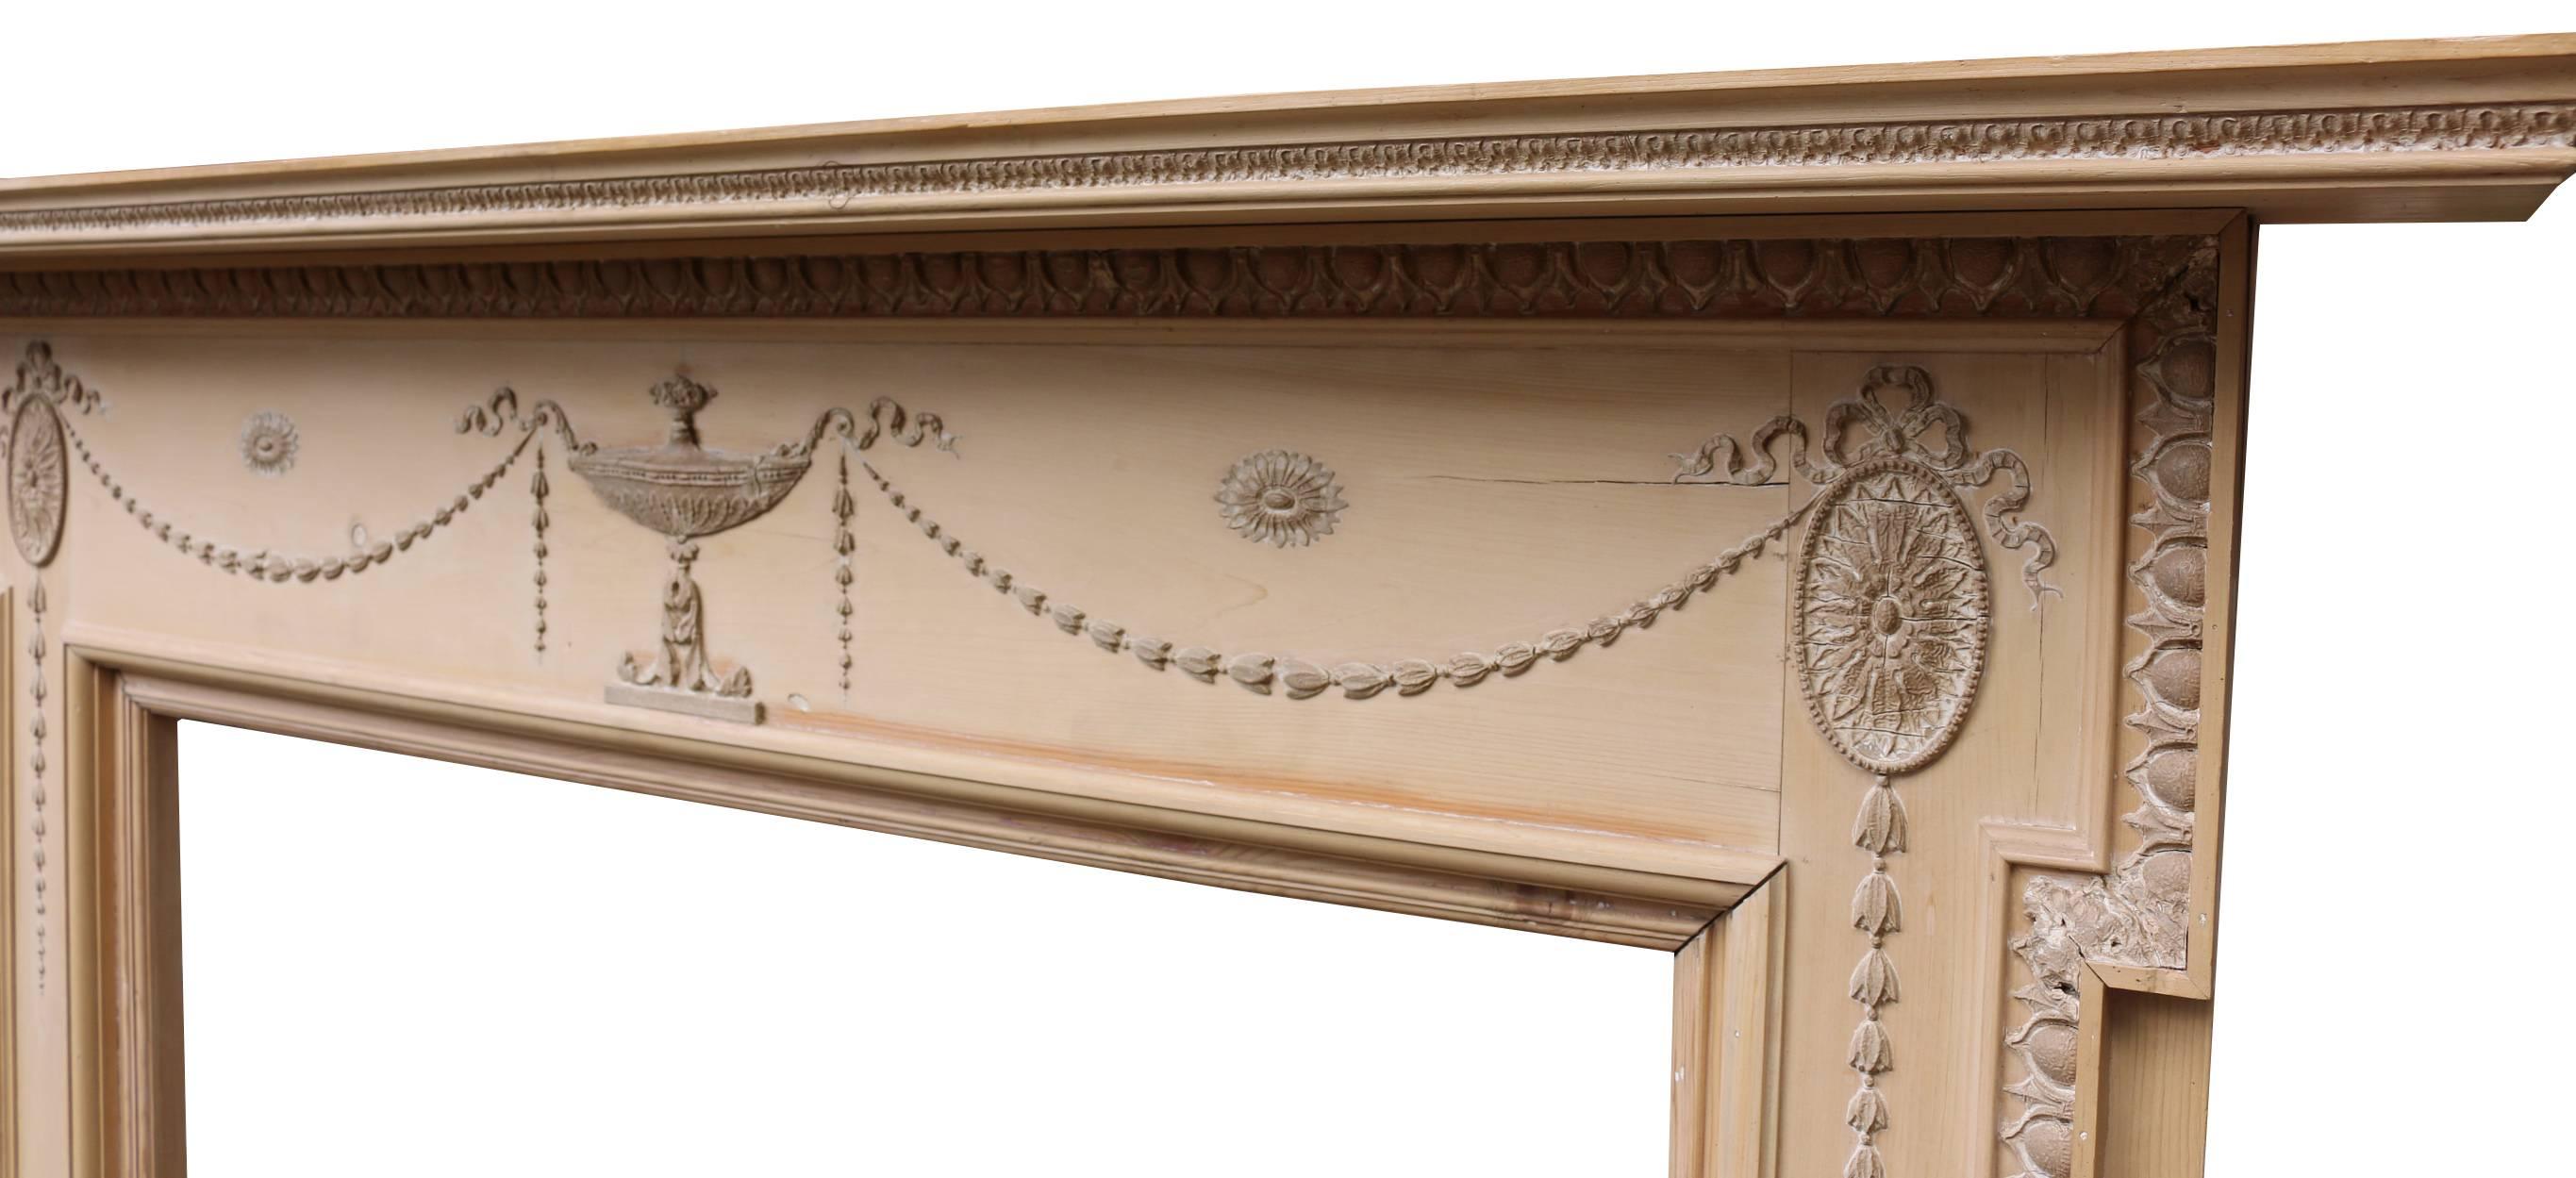 Carved Edwardian Pine and Composition Fire Surround with Mirrored over Mantel